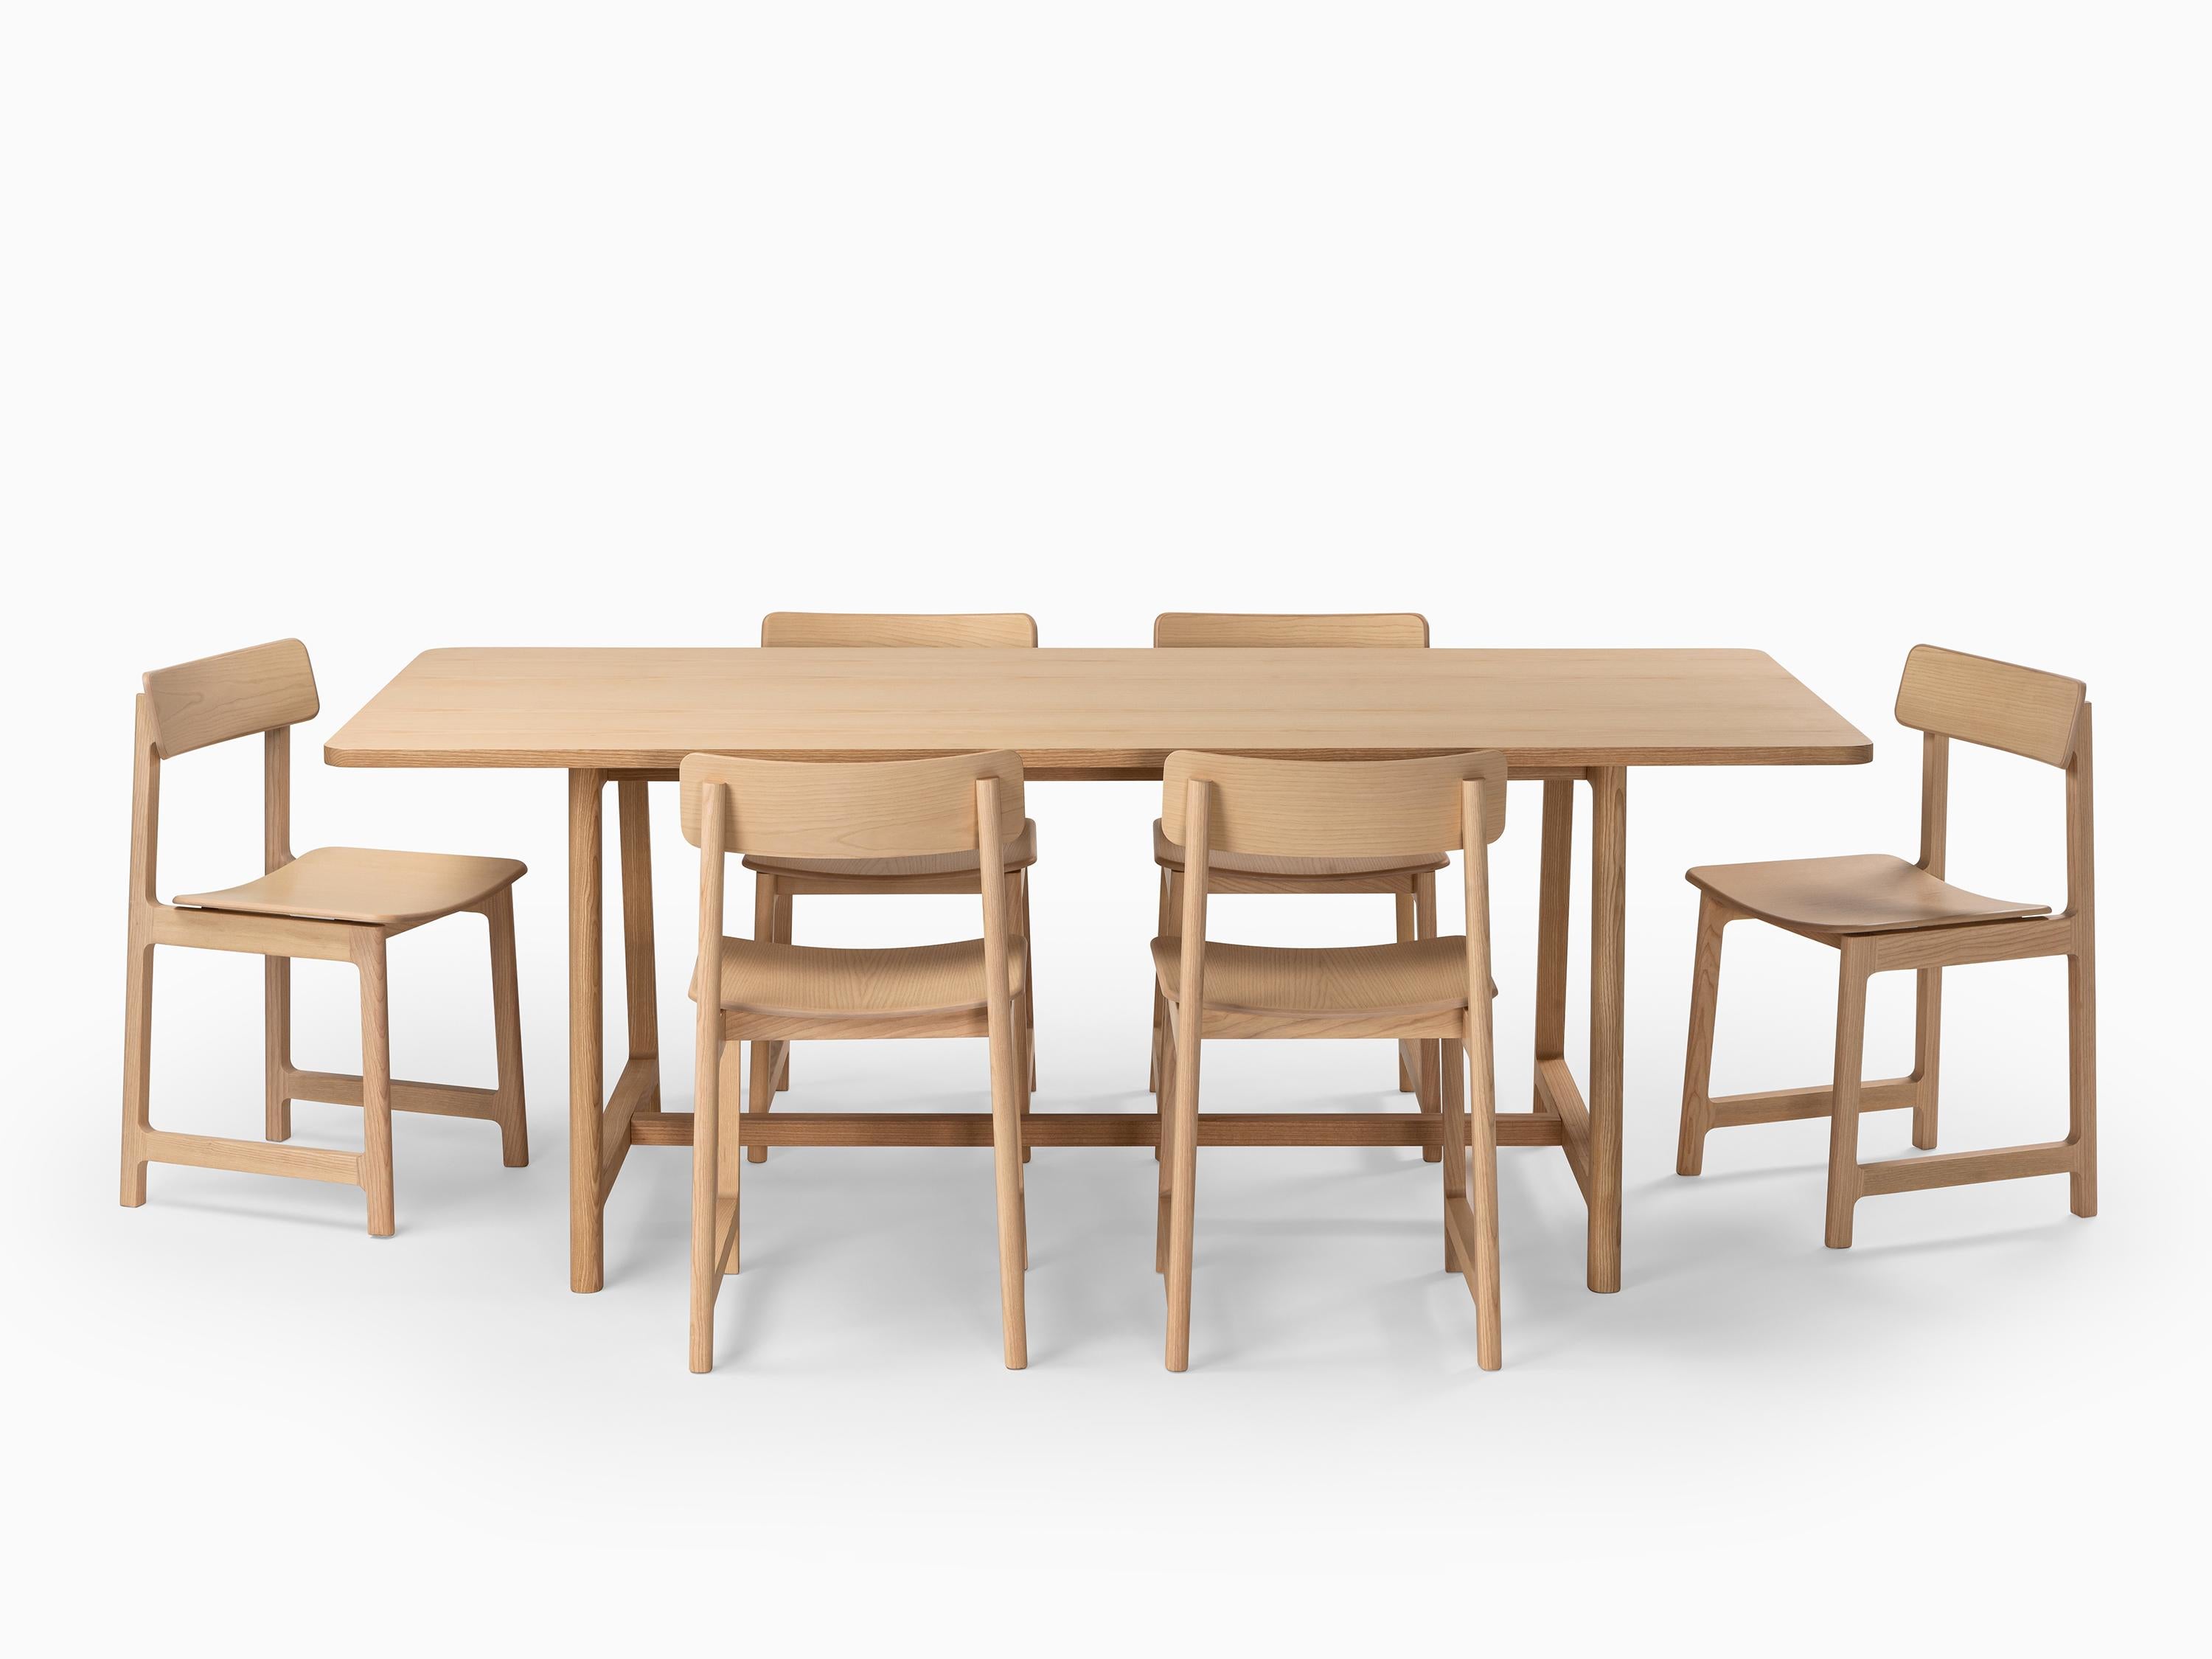 Portuguese Minimalist Modern Table in Oak Wood FRAME Collection For Sale